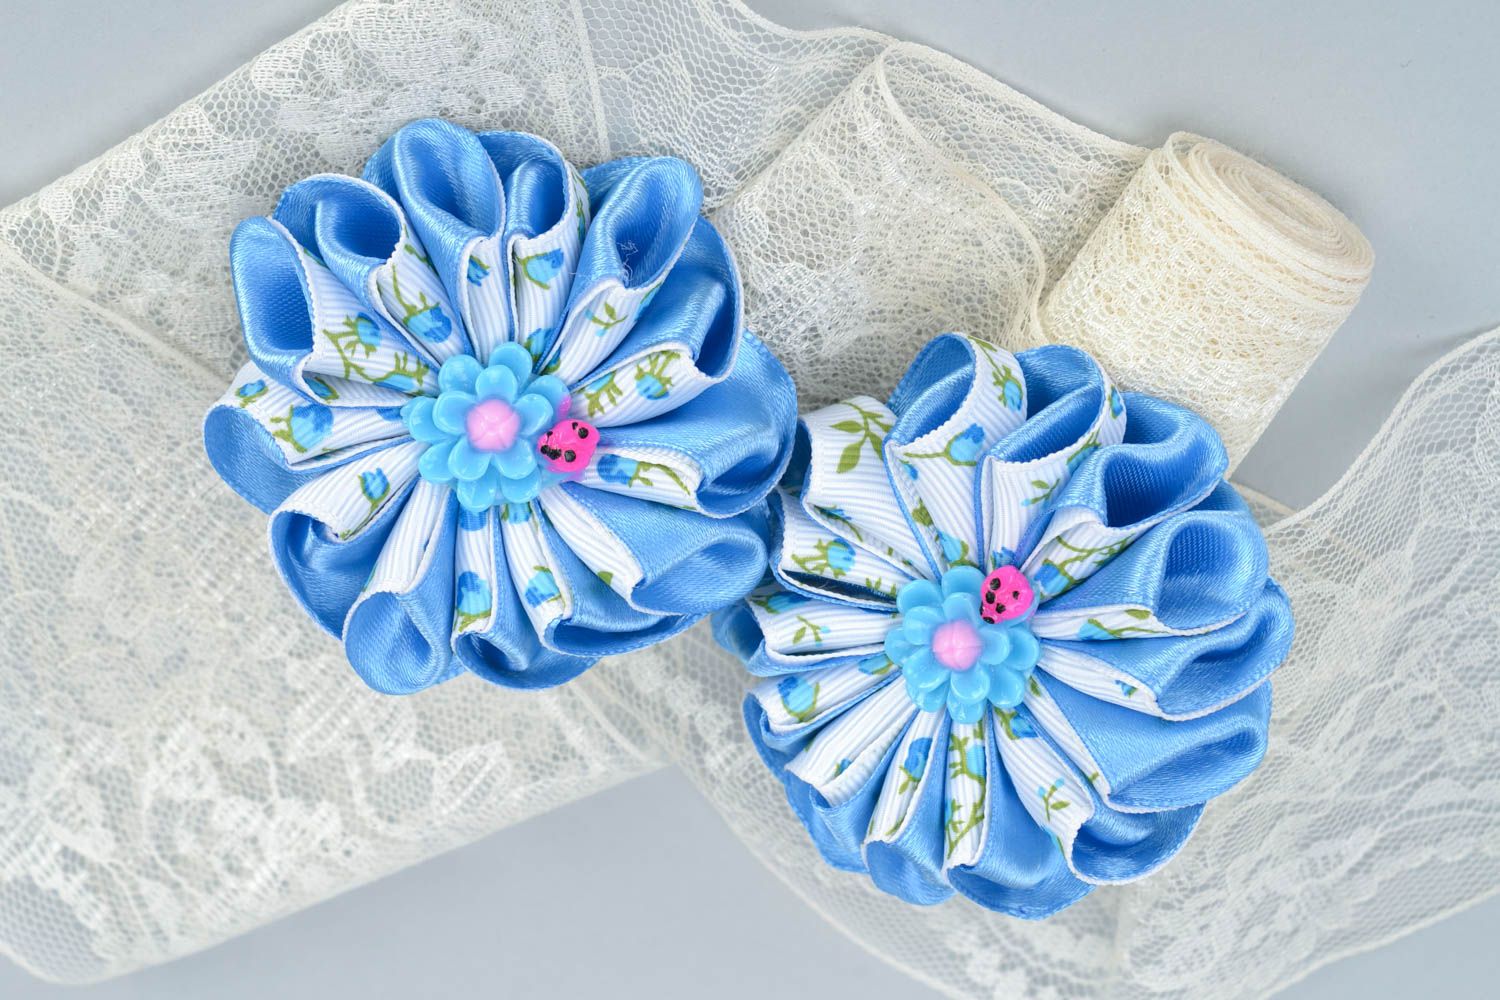 Handmade beautiful scrunchies with flowers made using kanzashi technique set of 2 pieces photo 1